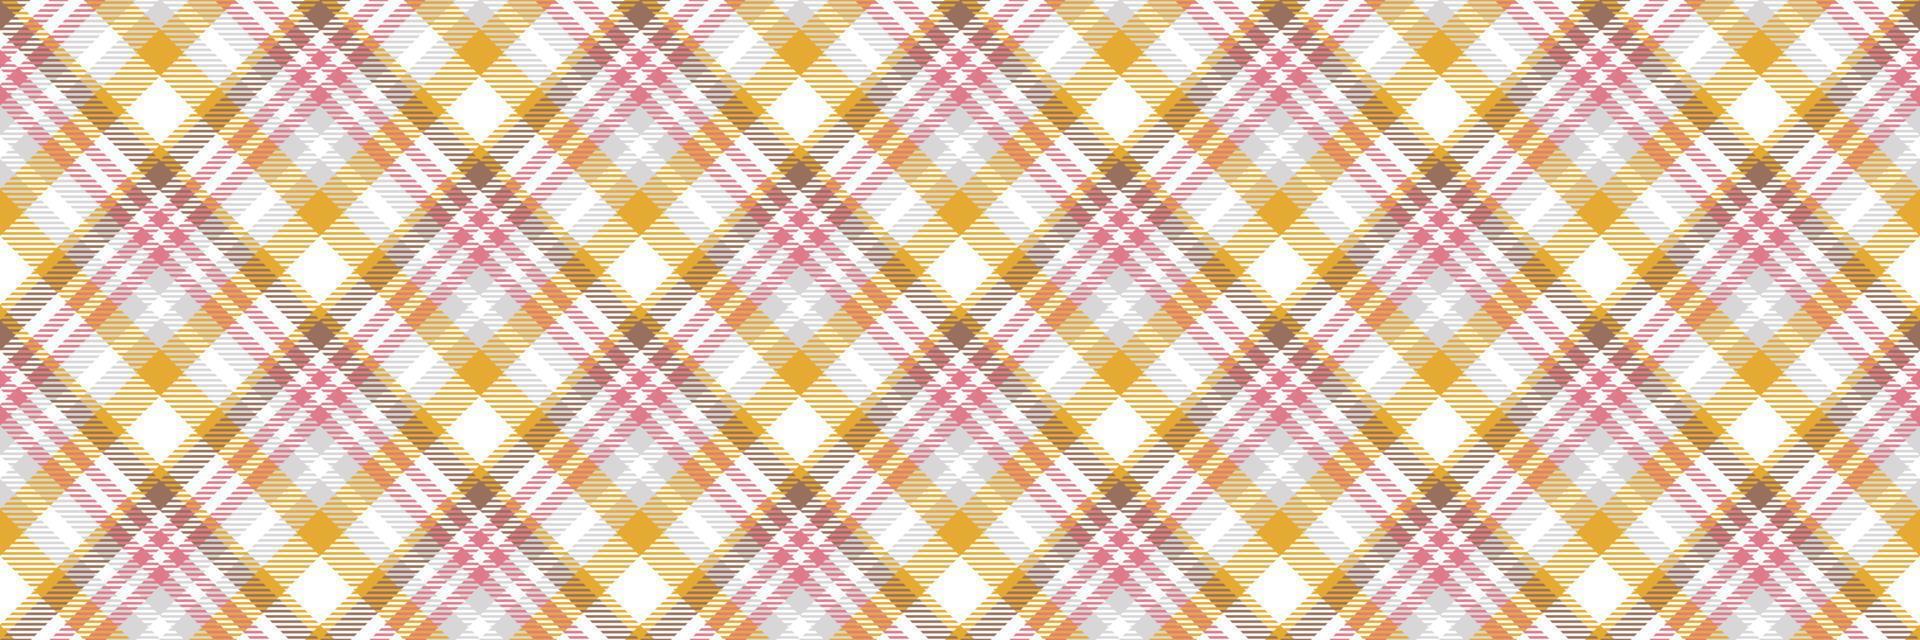 Scottish tartan pattern seamless is a patterned cloth consisting of criss crossed, horizontal and vertical bands in multiple colours.plaid Seamless for  scarf,pyjamas,blanket,duvet,kilt large shawl. vector